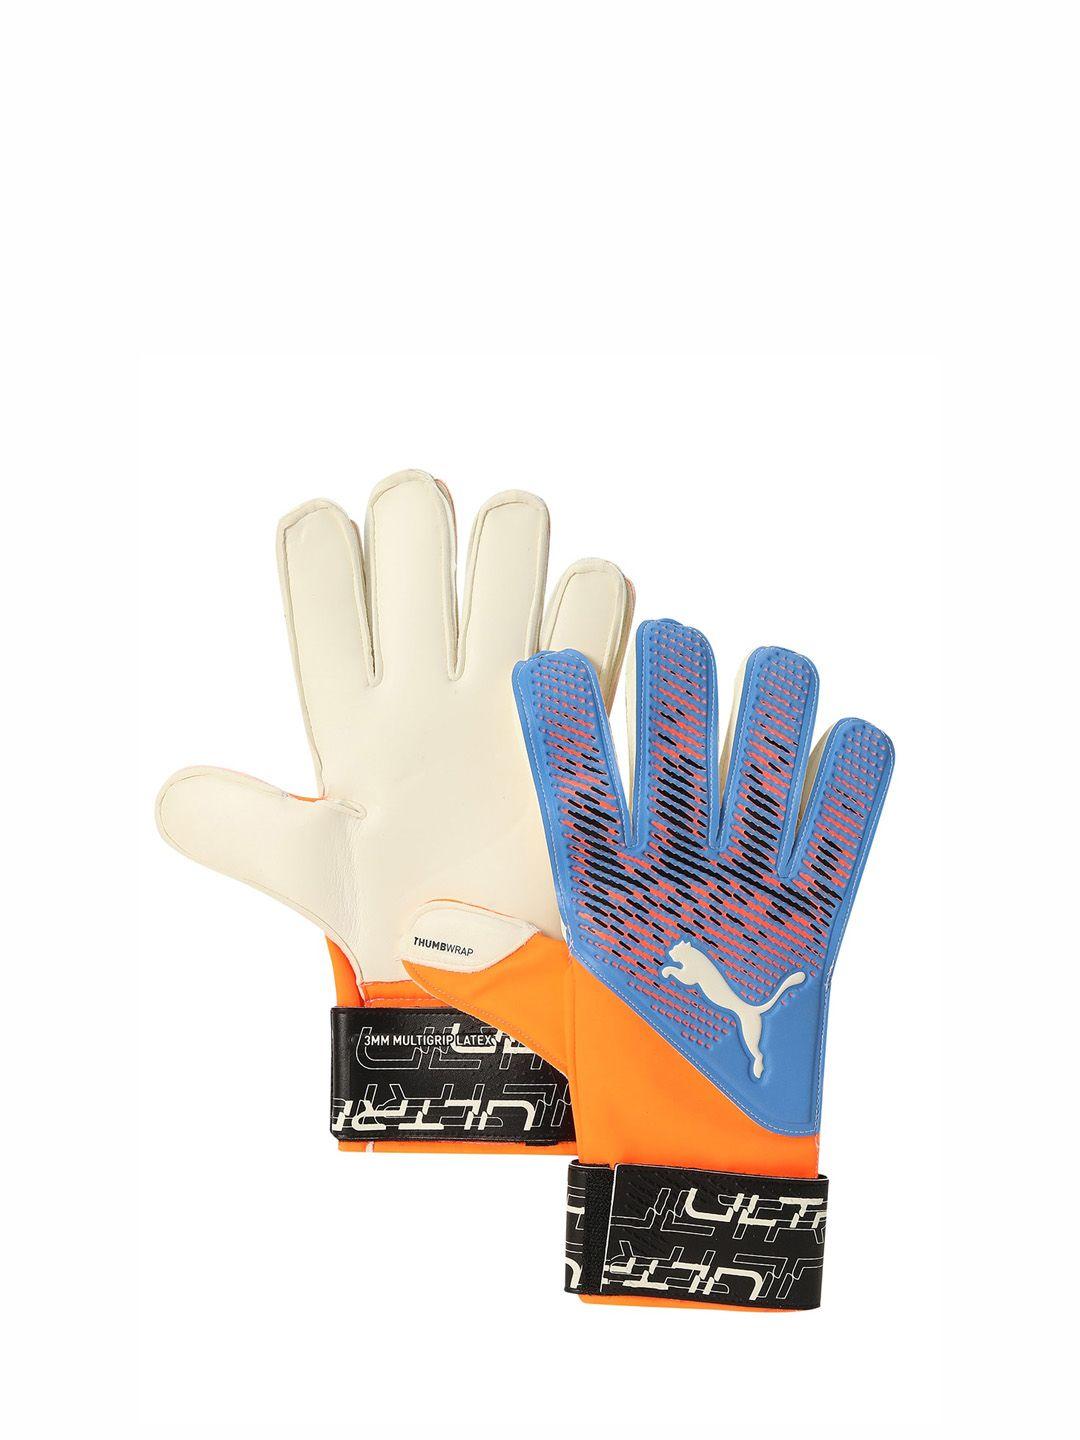 puma ultra grip 3 rc patterned sports gloves